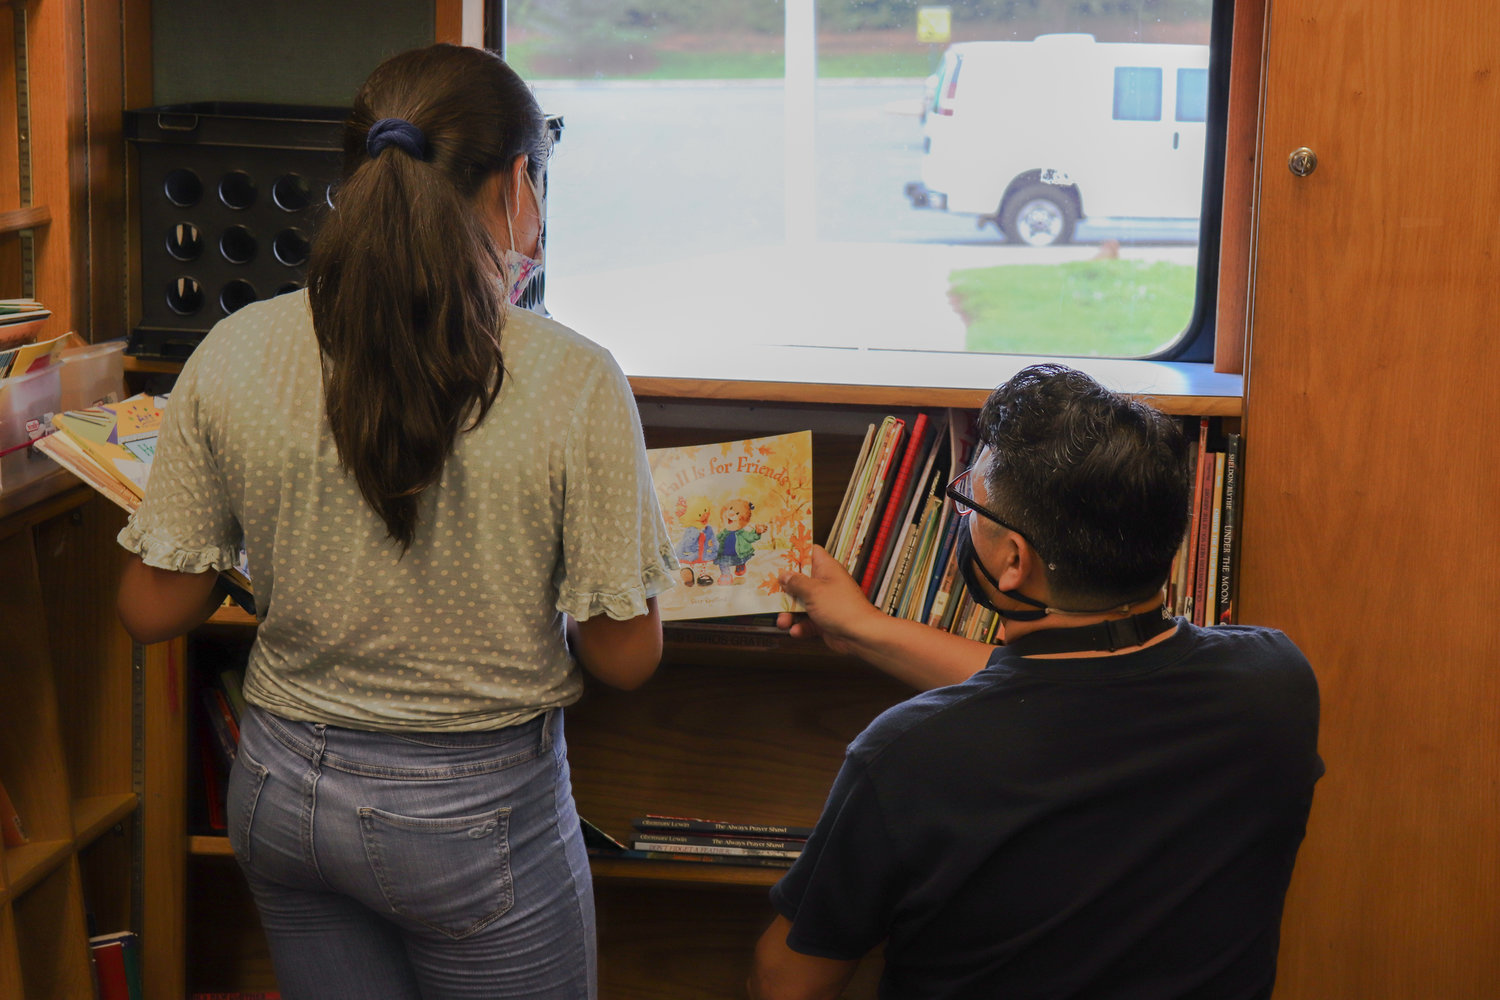 Enrique Rojas helps Melani Canela Soto identify which book she would like to take home last Tuesday in the Bookmobile. The Bookmobile carries thousands of books on board.